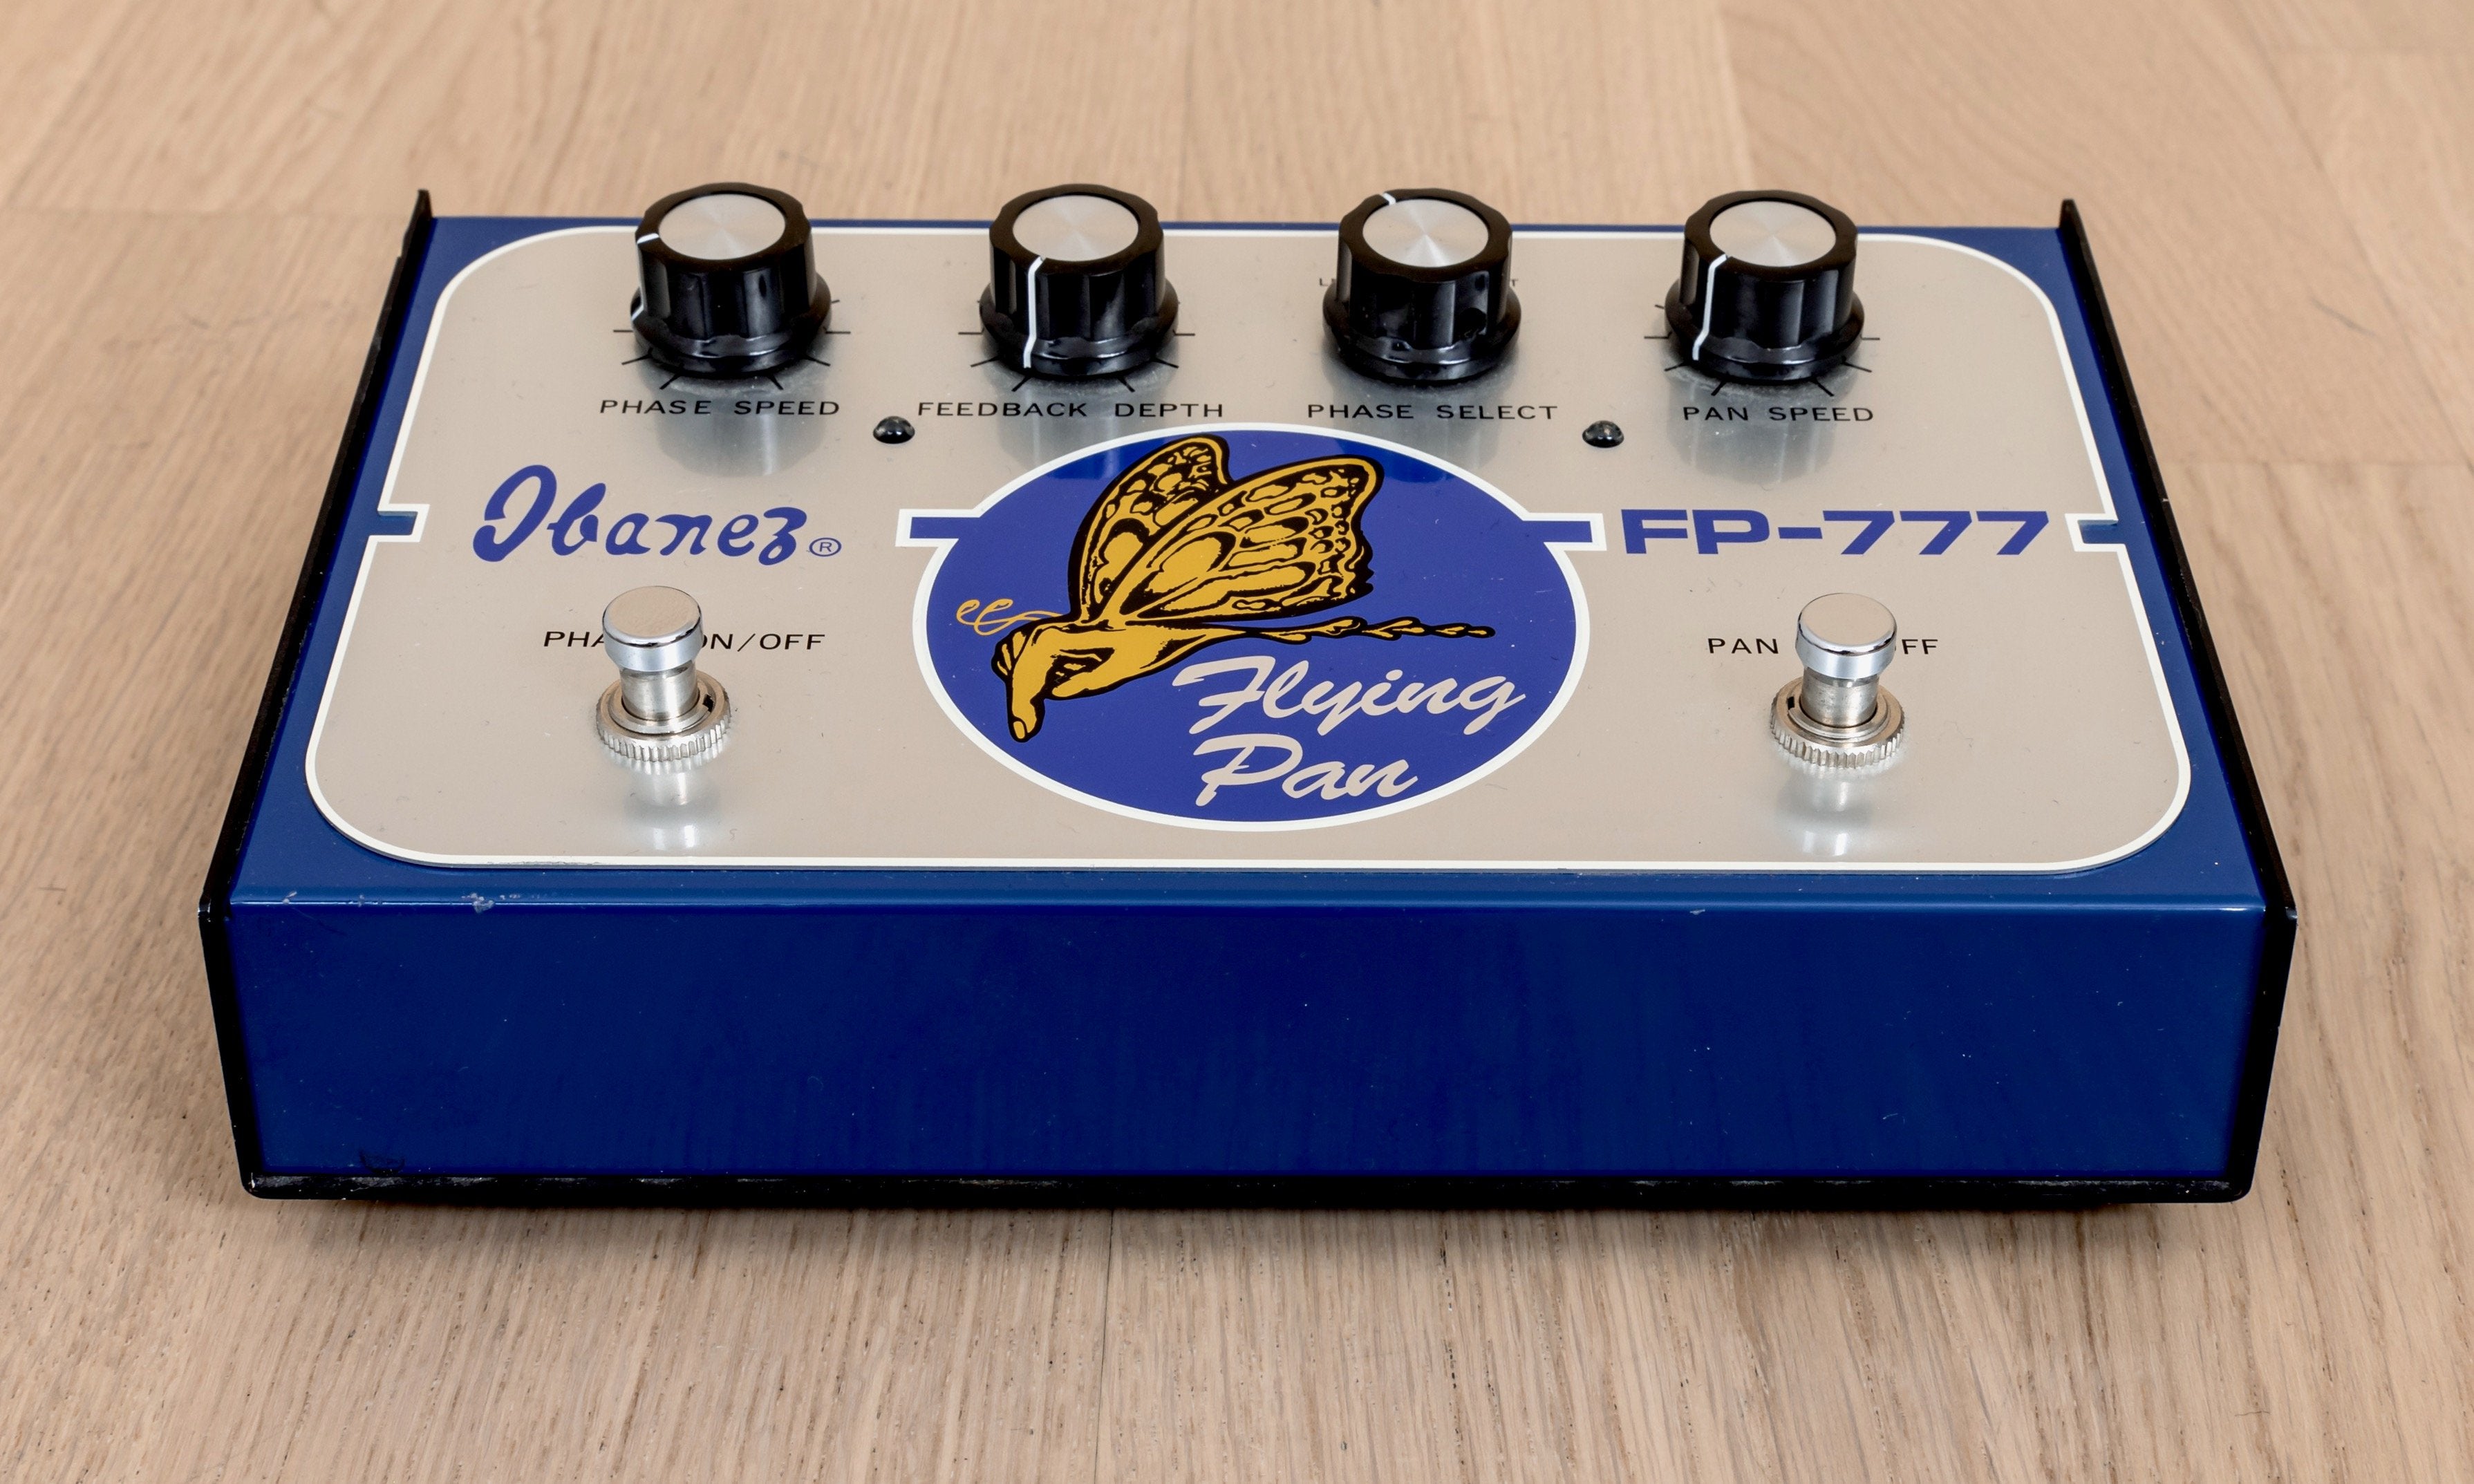 2008 Ibanez FP-777 Flying Pan Vintage Reissue Phaser Stereo Guitar Effects Pedal, Japan